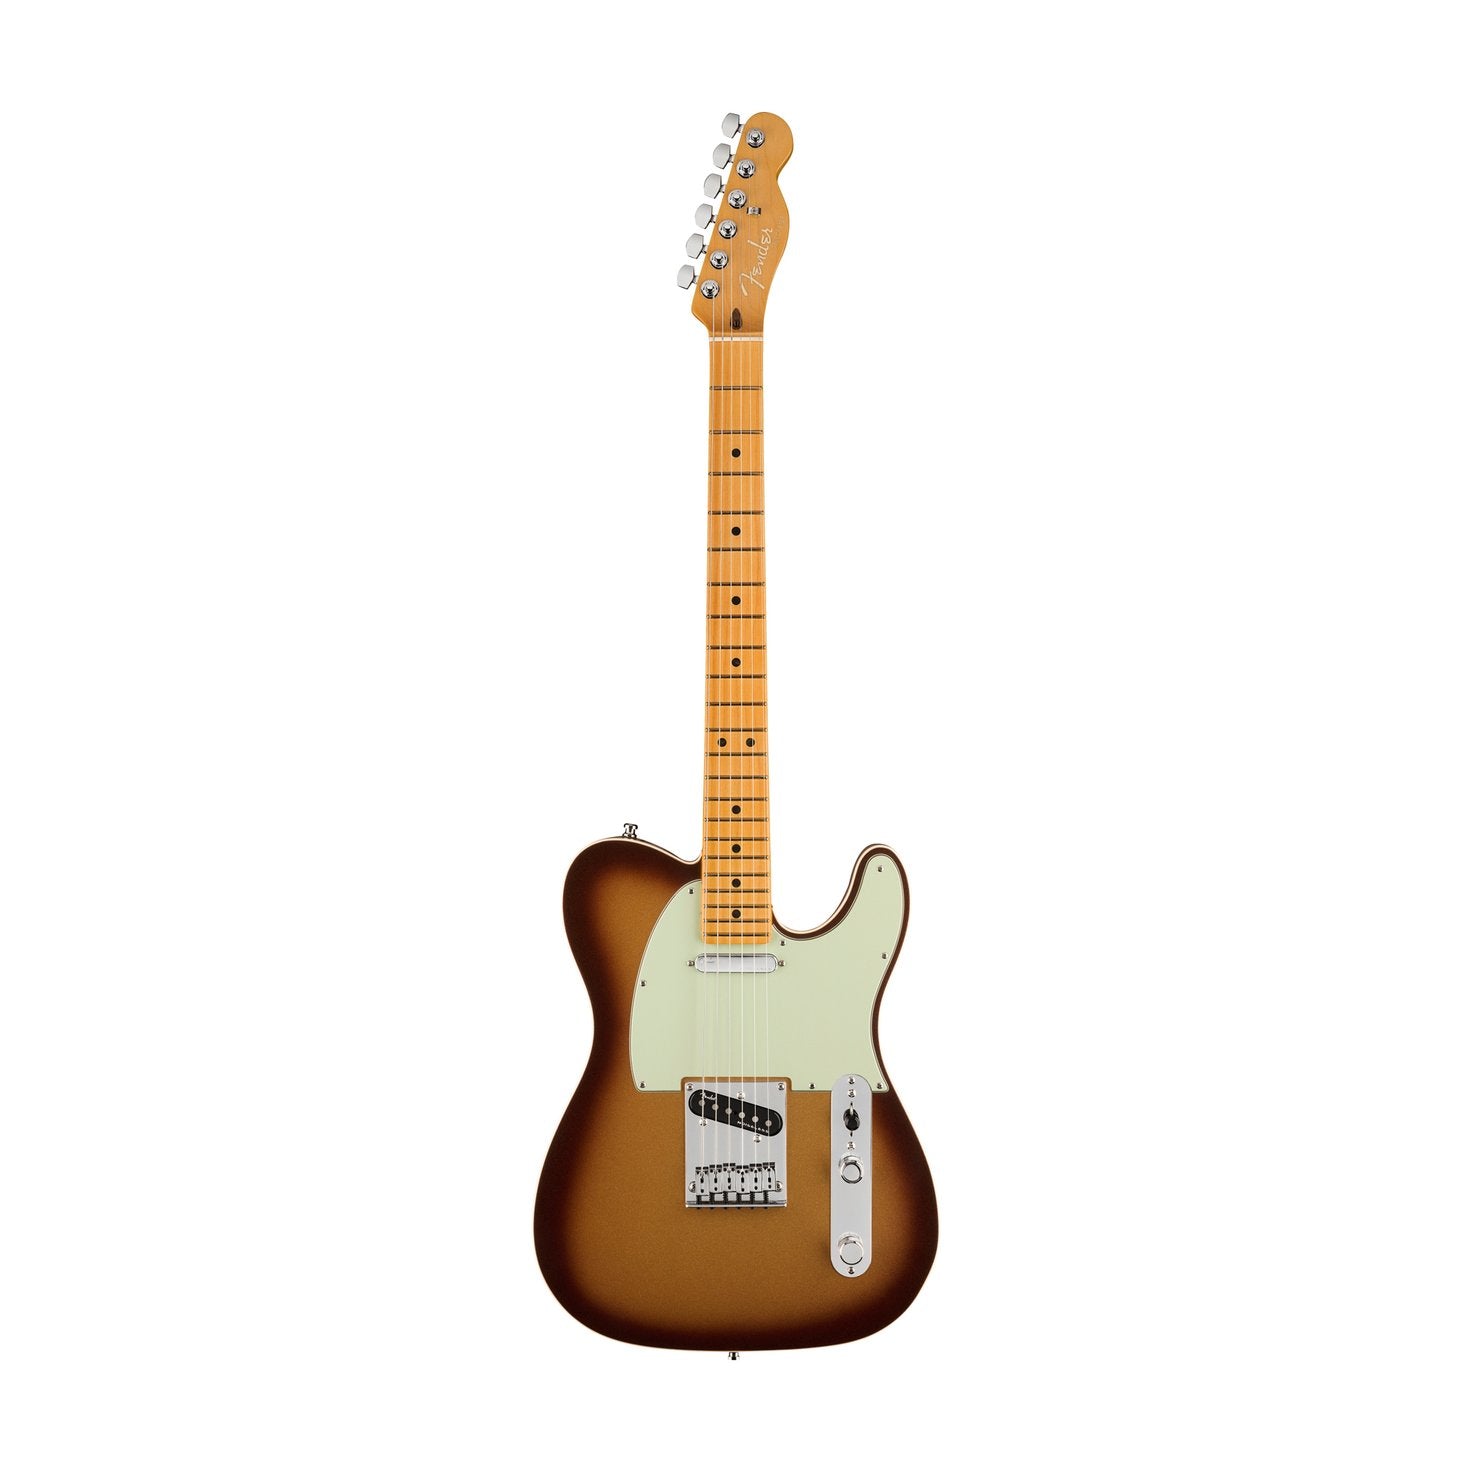 Fender American Ultra Telecaster Electric Guitar, Maple FB, Mocha Burst, FENDER, ELECTRIC GUITAR, fender-electric-guitar-f03-011-8032-732, ZOSO MUSIC SDN BHD